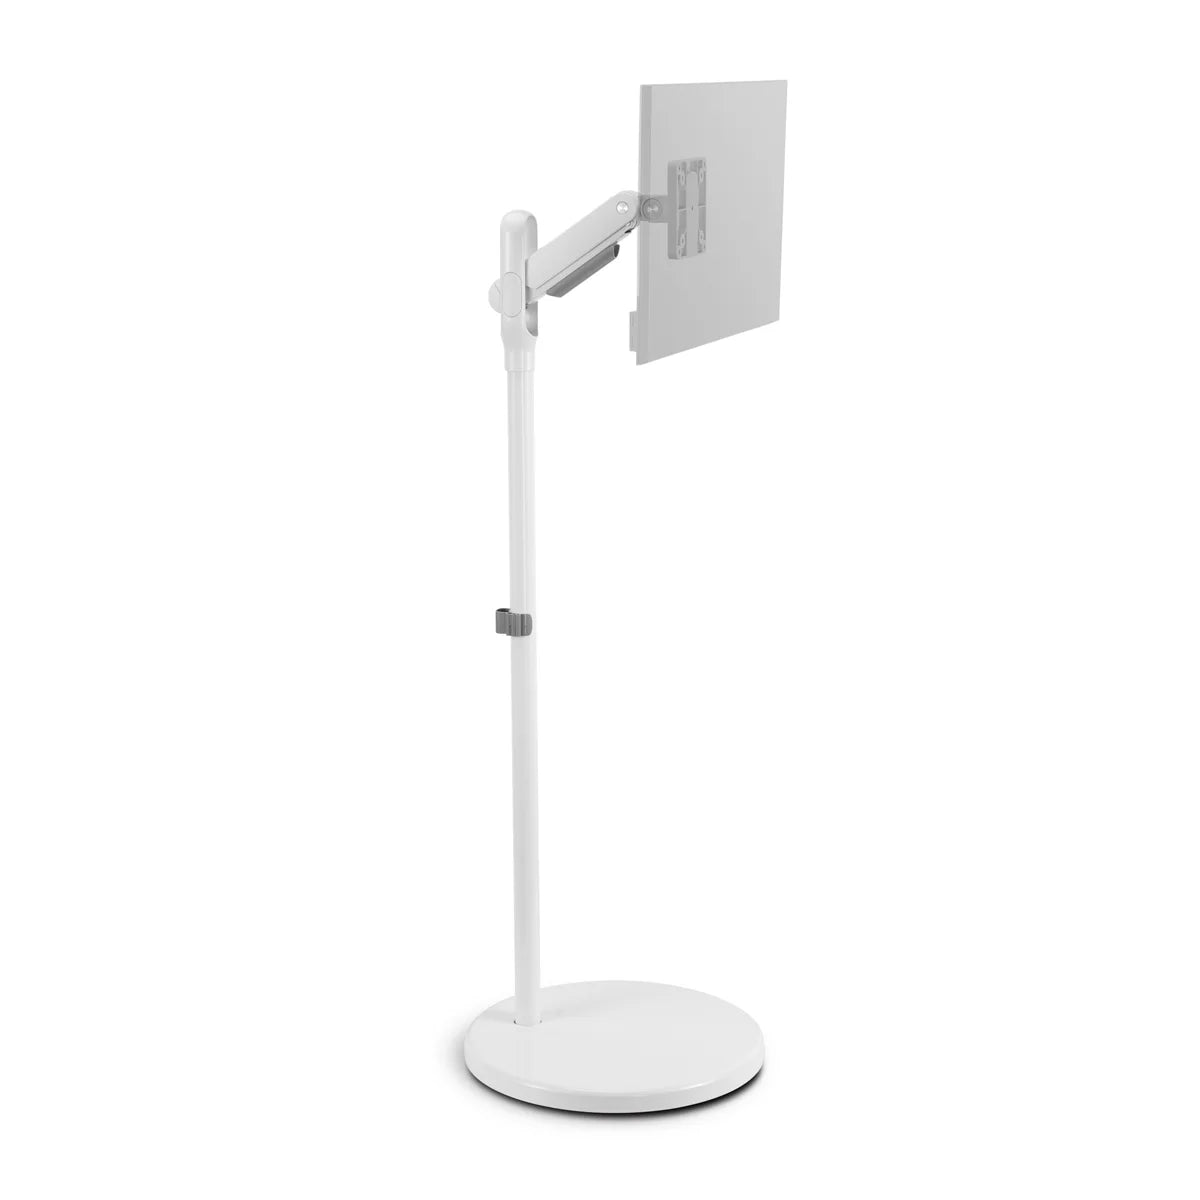 Skilltech- SH38 11TW FS -  Mobile Spring-Assisted Display Floor Stand